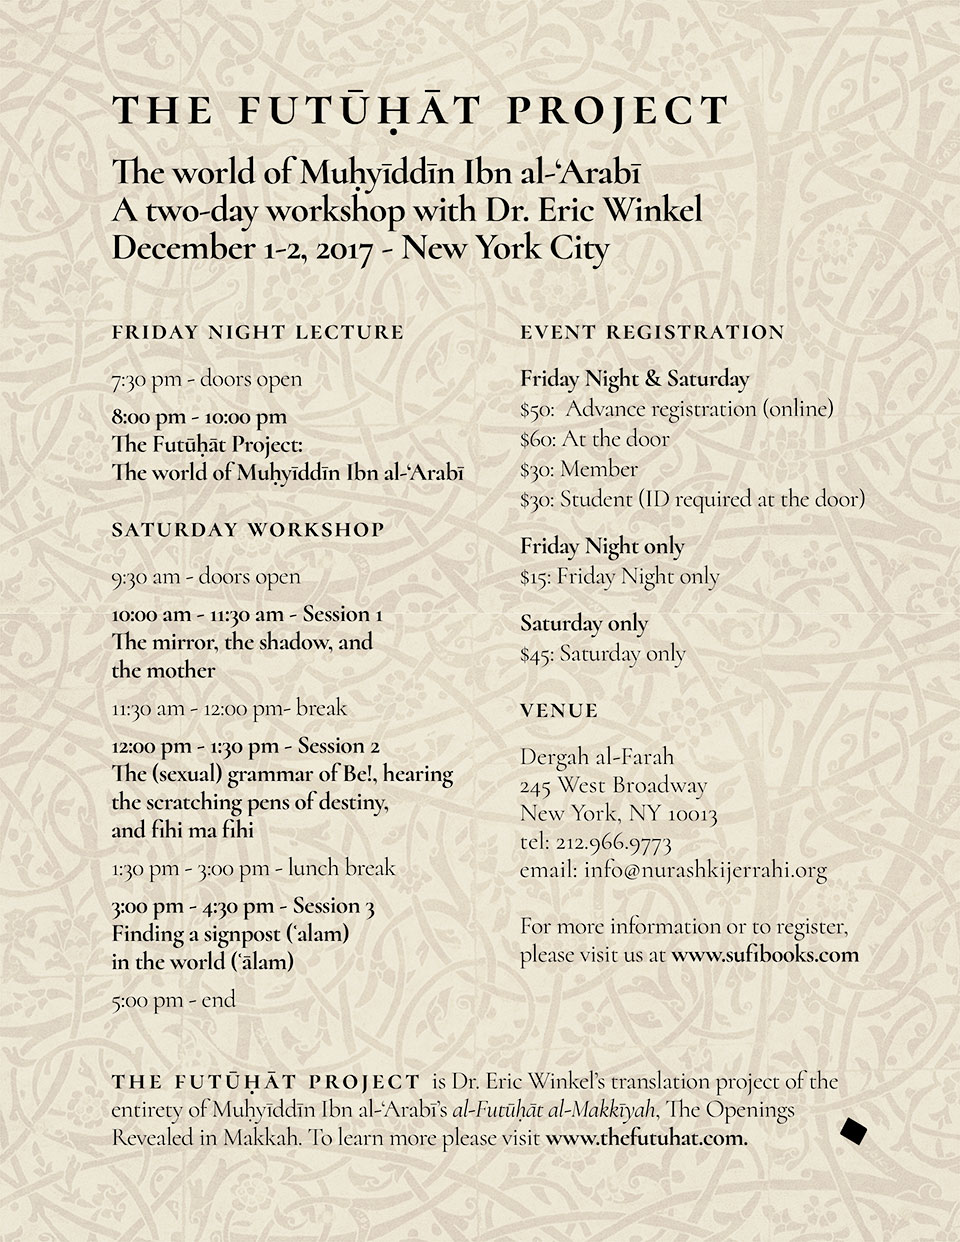 Friday & Saturday, December 1-2, 2017 | The Futuhat Project: The world of Muhyiddin Ibn al-‘Arabi | A two-day workshop with Dr. Eric Winkel | Advance Registration Online – $50